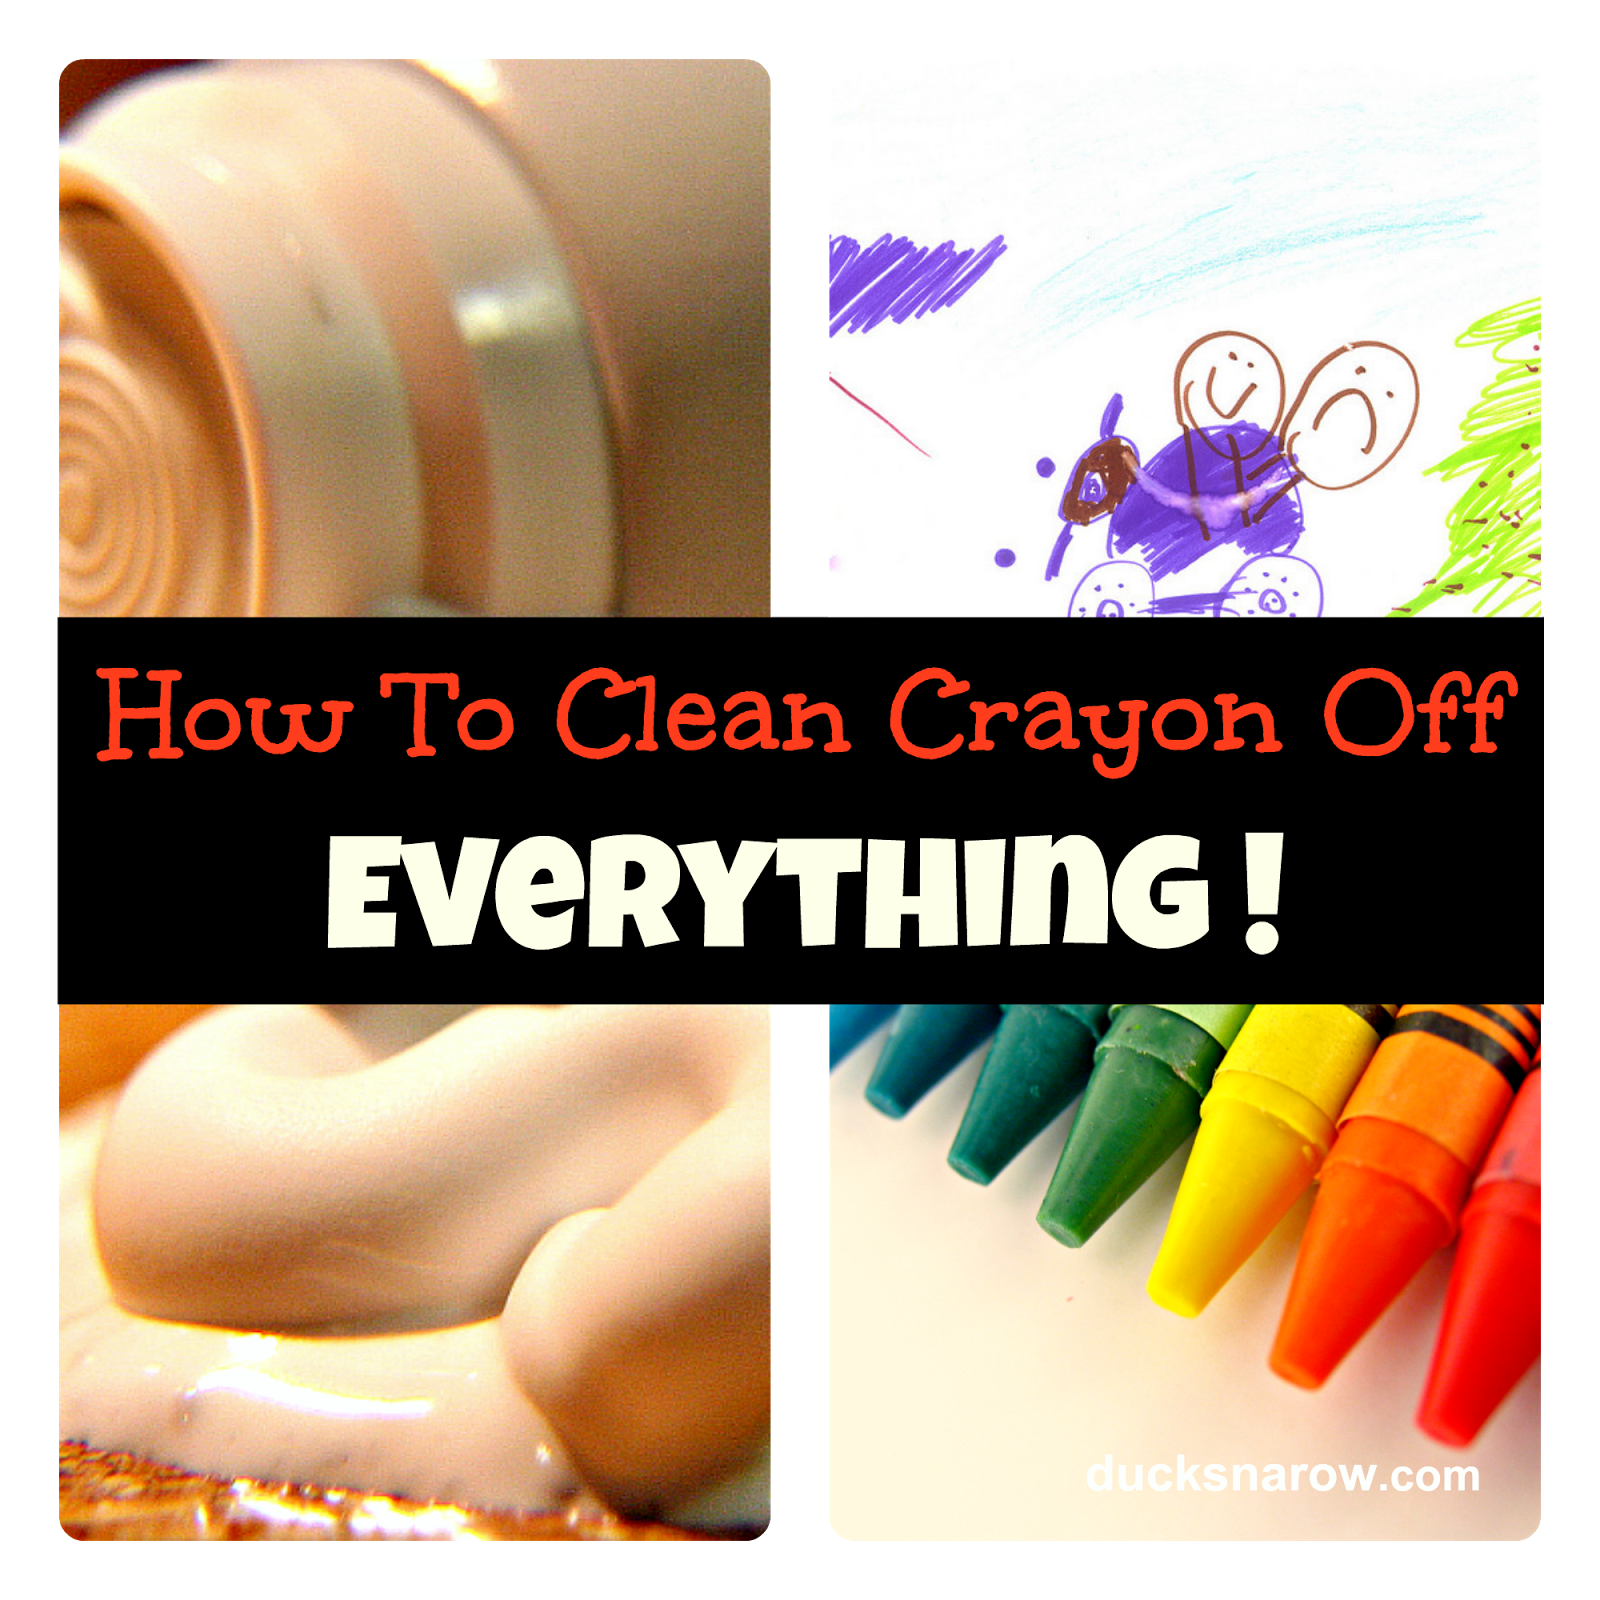 How to Clean Crayon off Everything